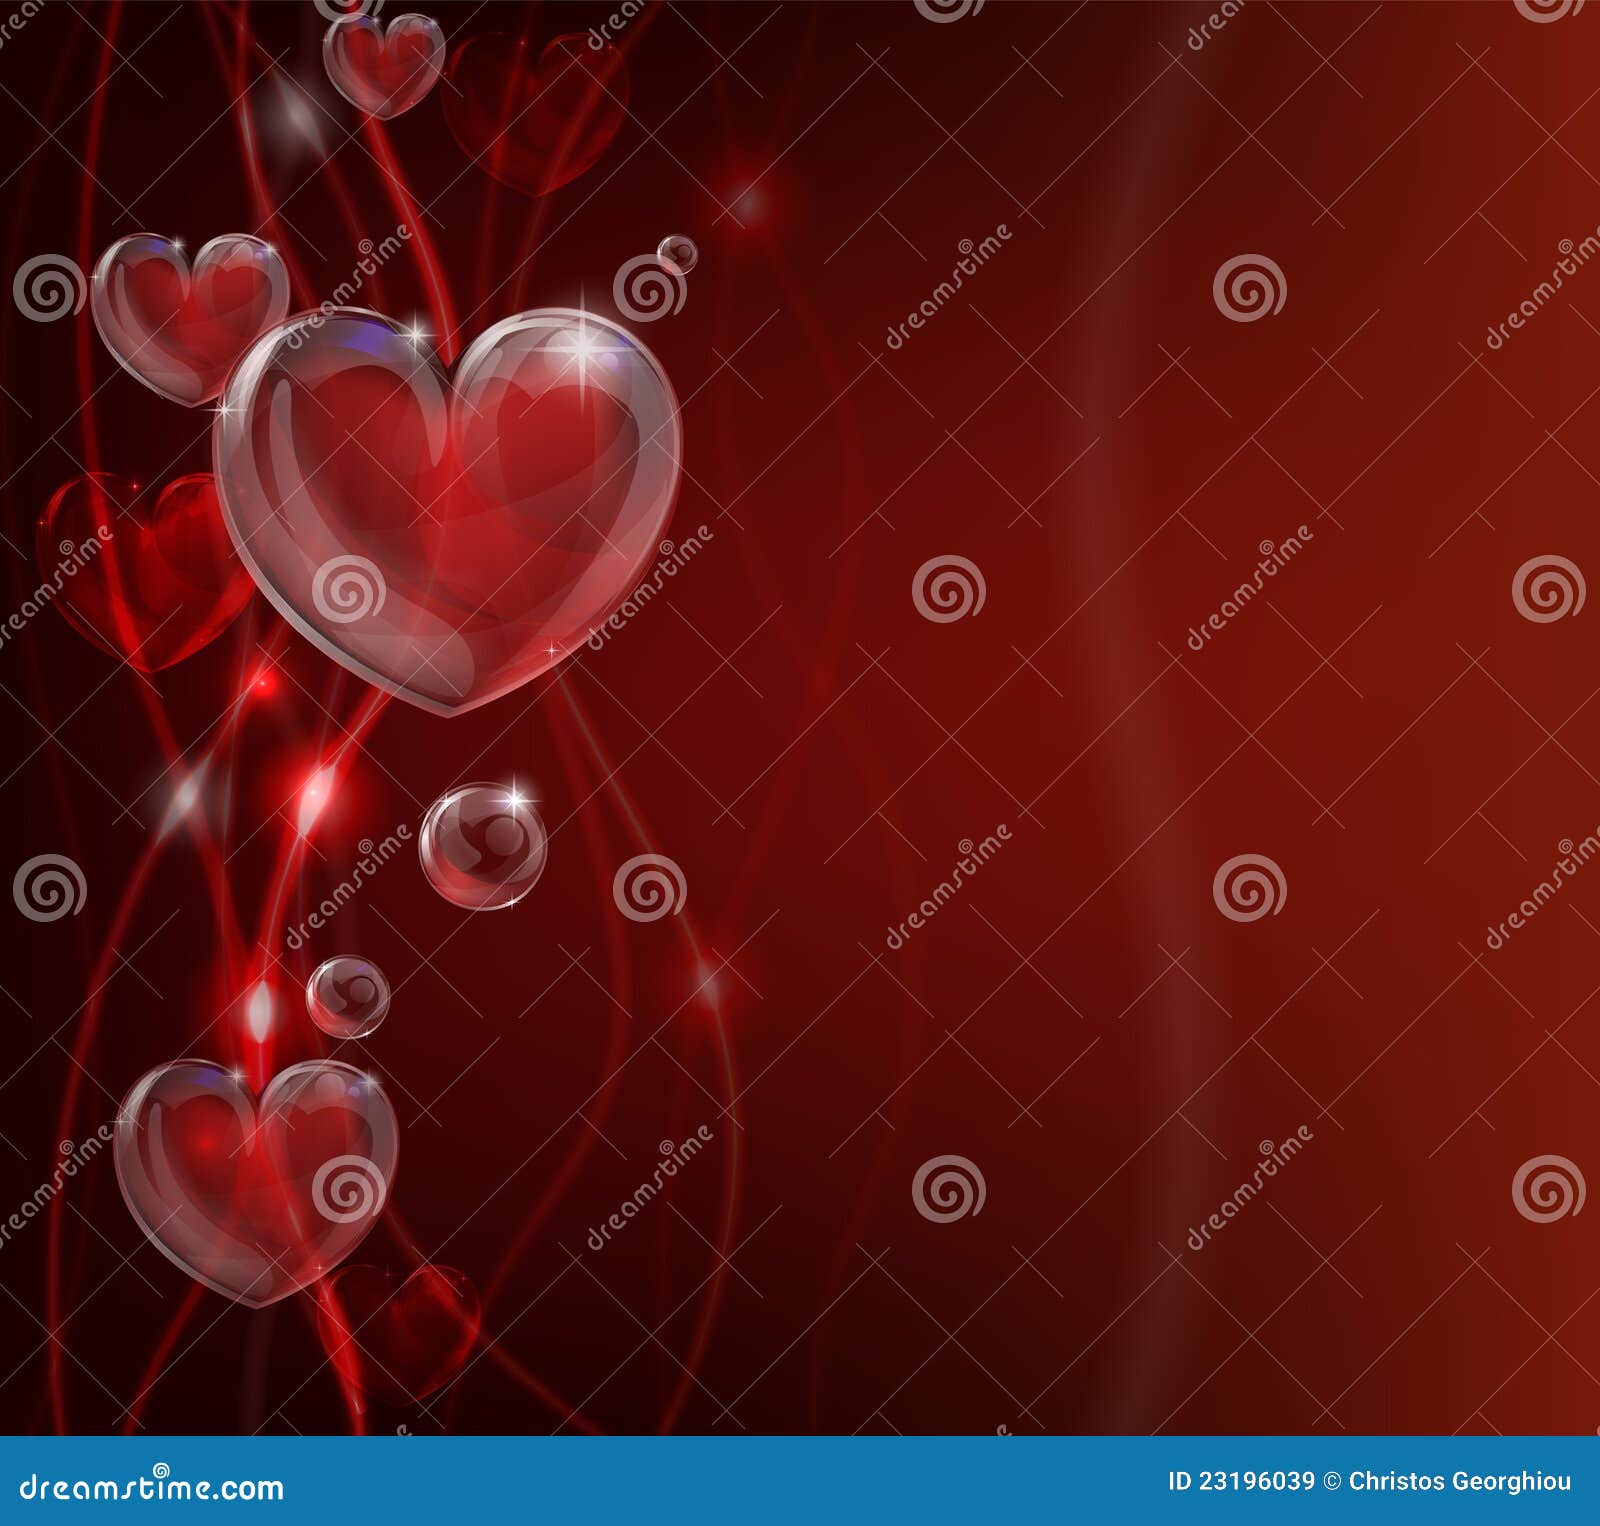 Abstract Valentines Day Heart Background Royalty Free Stock Images - Image: 23196039